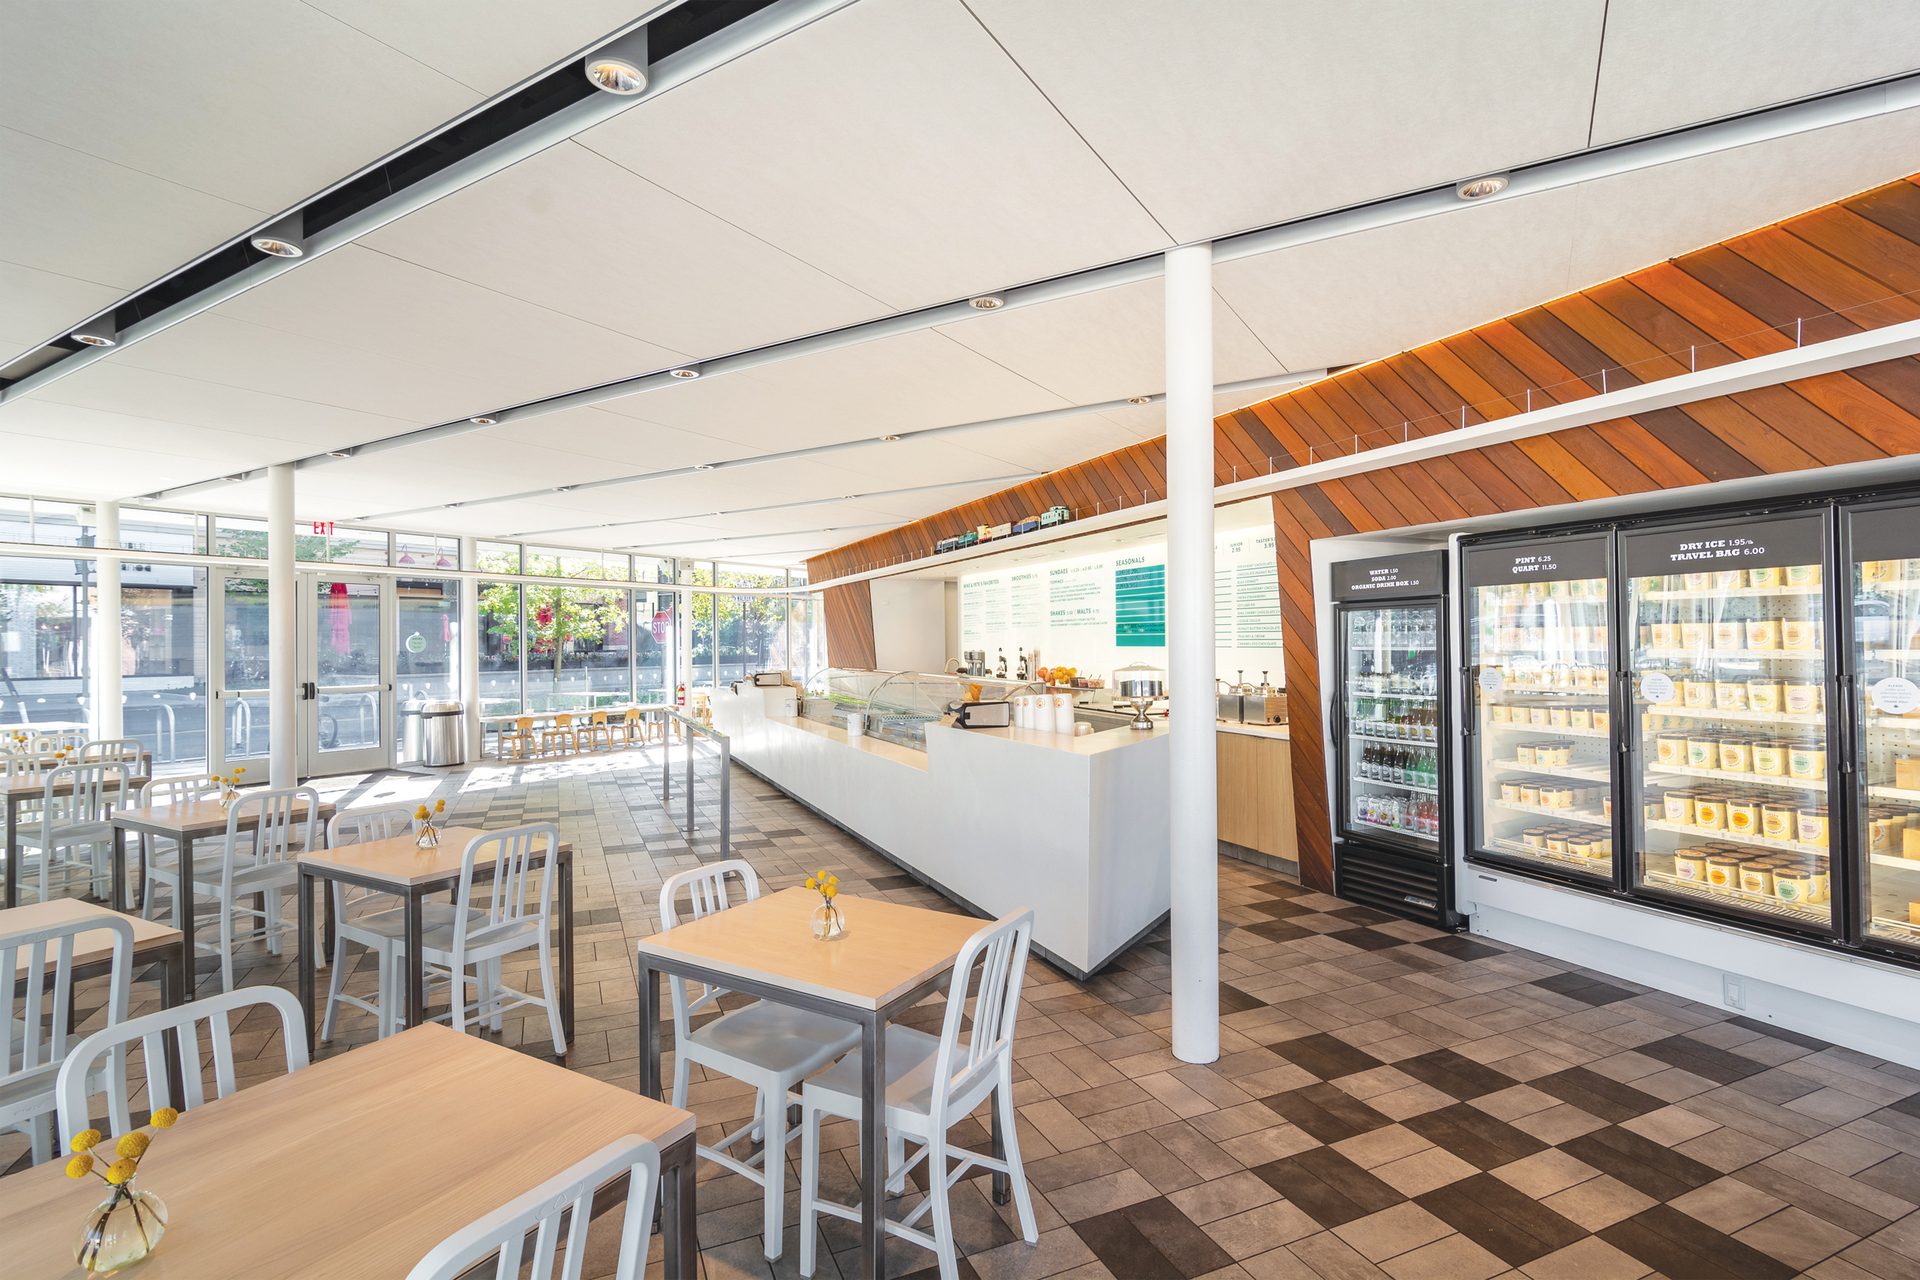 Bright interior of an ice cream shop with white ceiling and wood finished wall system.